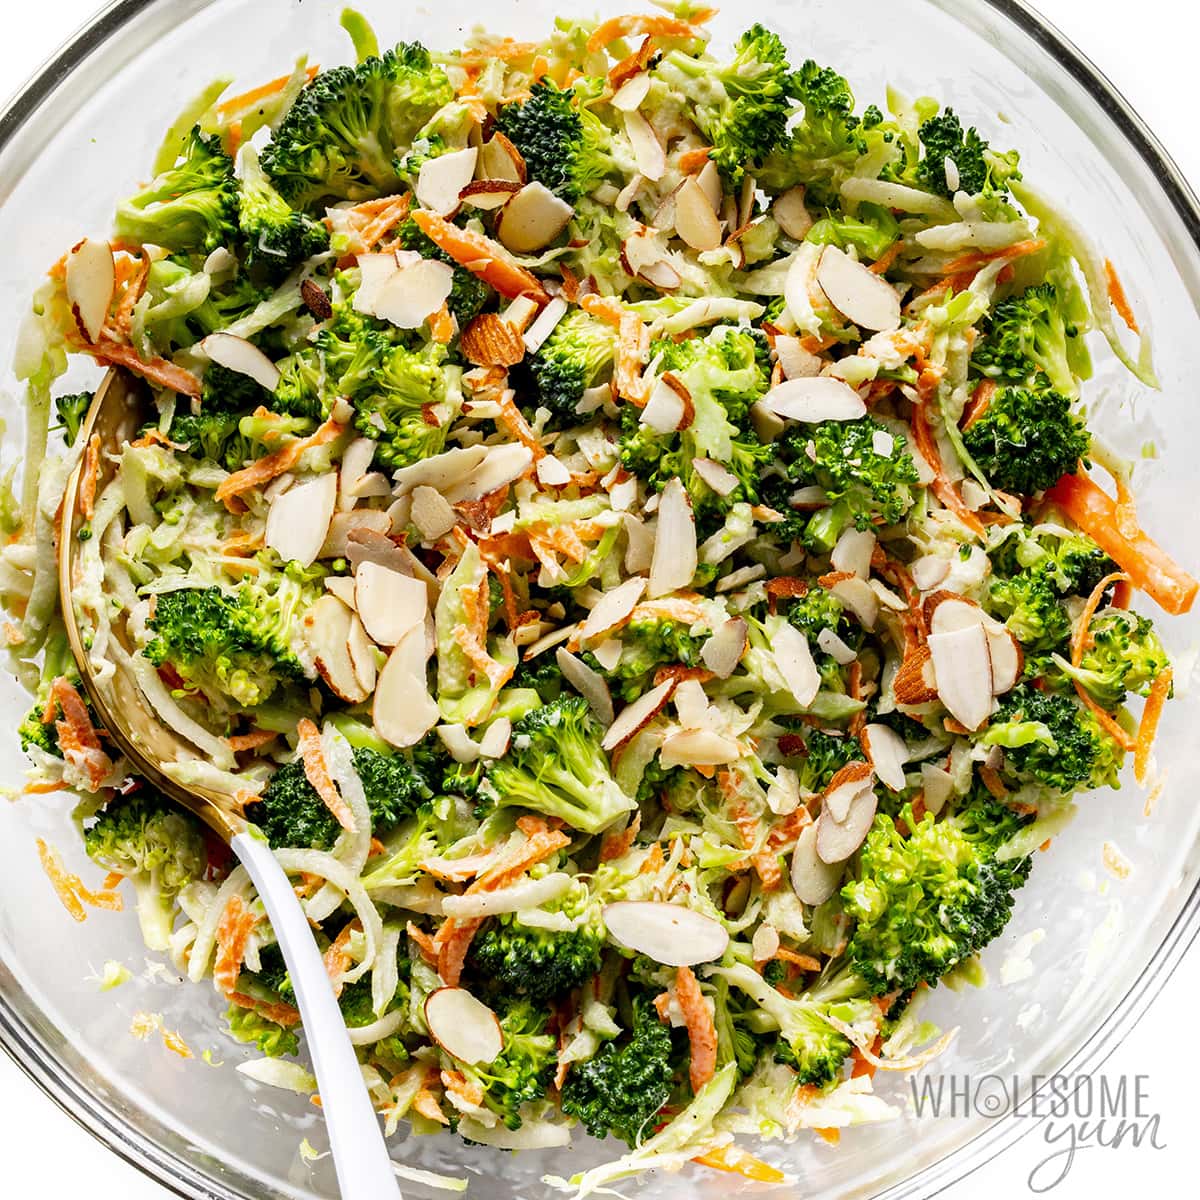 Broccoli slaw tossed with dressing in a bowl with a spoon.